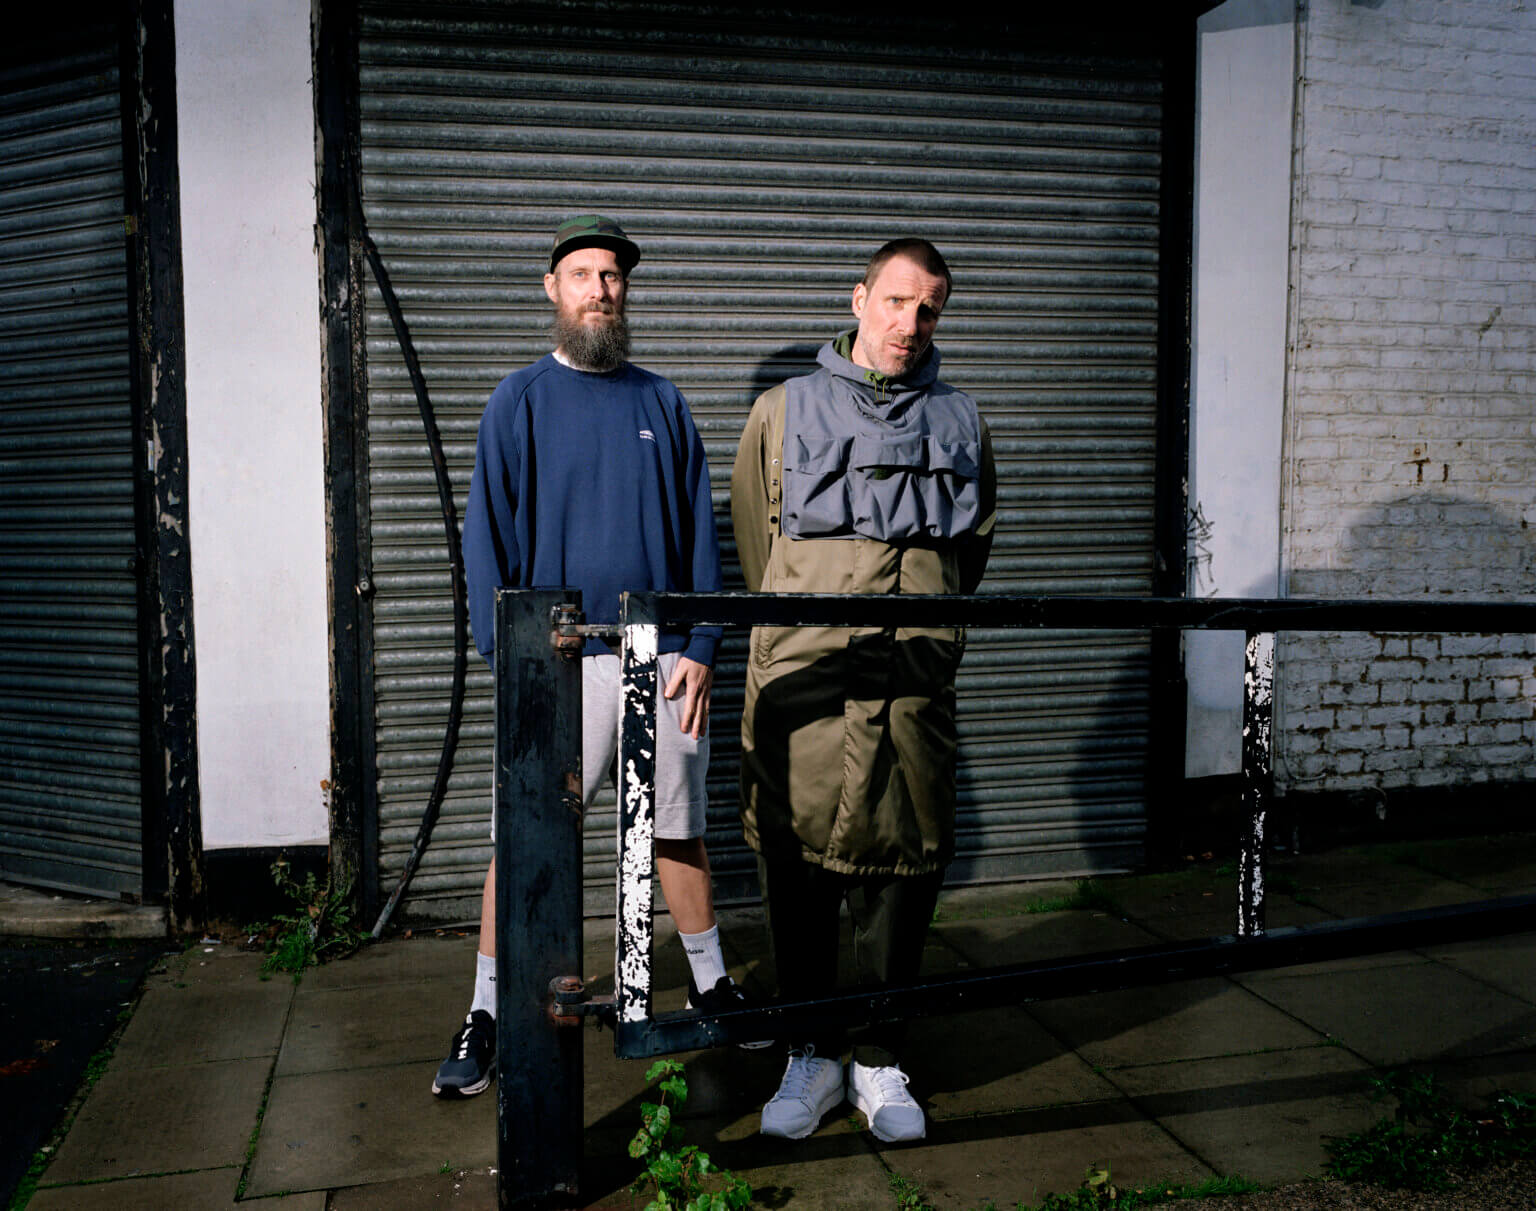 Sleaford Mods Announce More Uk Grim. The UK duo's new album drops on October 23rd via Rough Trade Records and DSPs